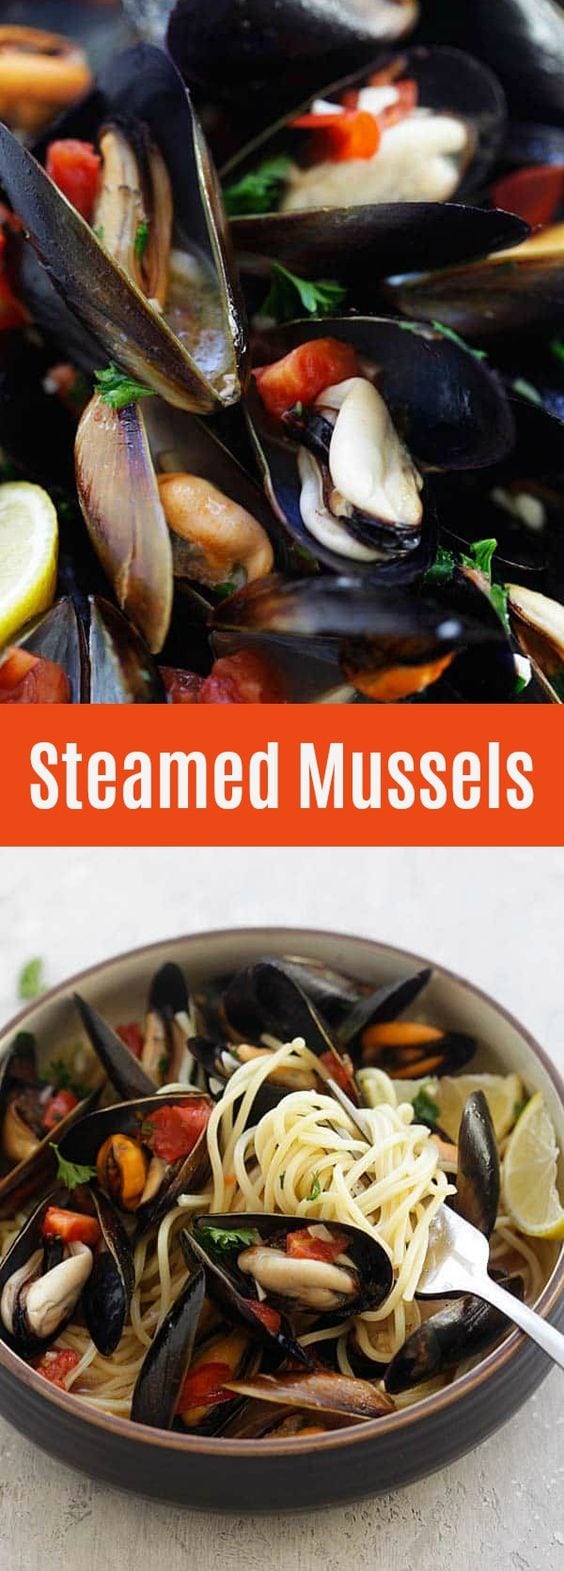 Steamed Mussels - easiest steamed mussels recipe ever, with simple ingredients and takes 20 mins. Serve with pasta for restaurant's quality dinner | rasamalaysia.com